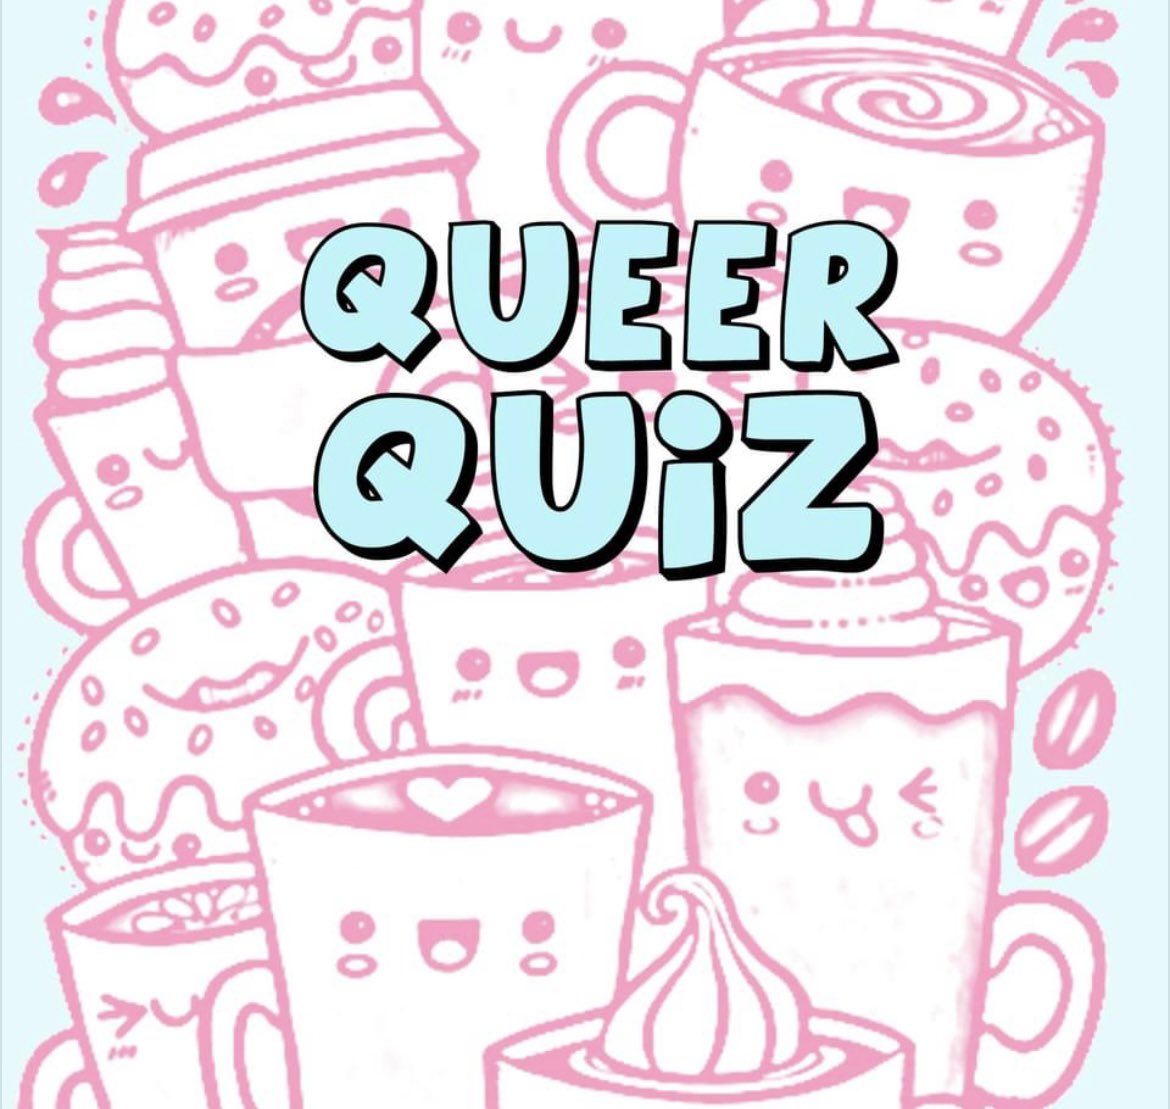 Don’t forget - this is happening tomorrow (Thursday) as part of our Leeds Pride celebrations. 7pm Thursday 4th August at Flamingos Coffee House - all welcome :) #leedspride #queerleeds #lgbtleeds #leeds #quiznight